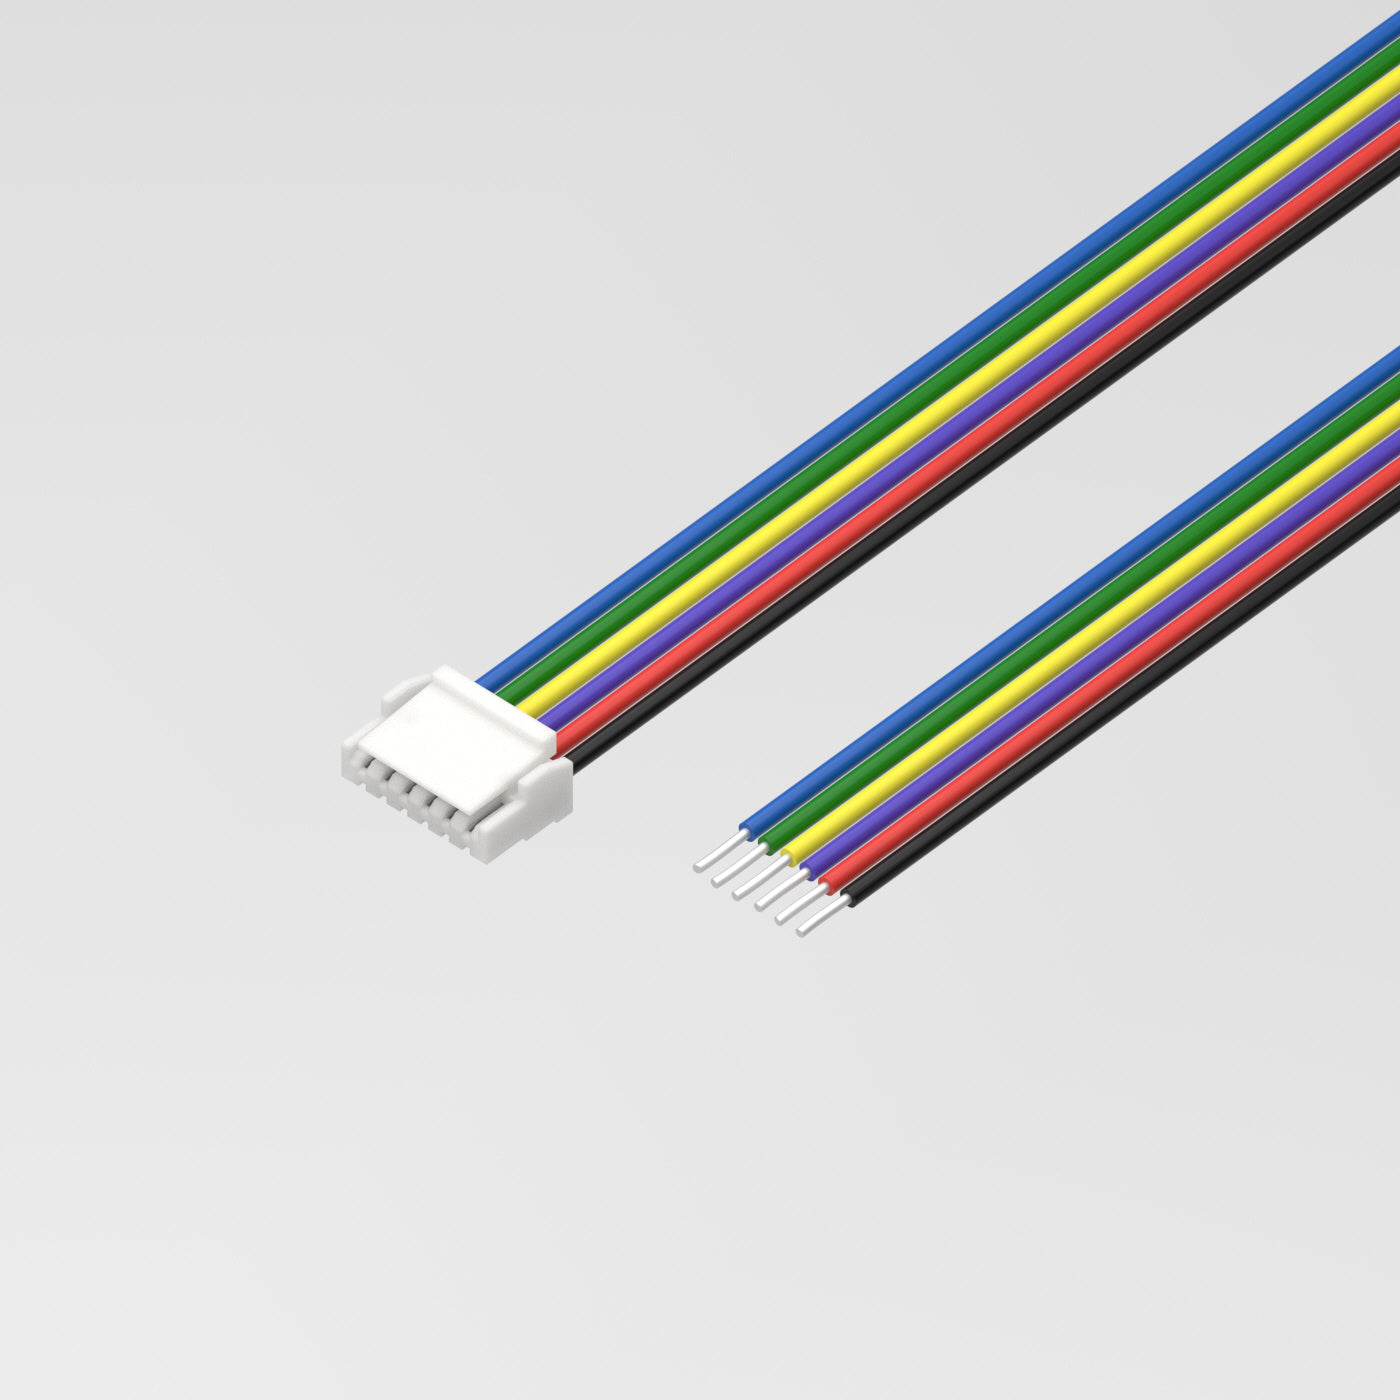 JST-GH 6 pin cable